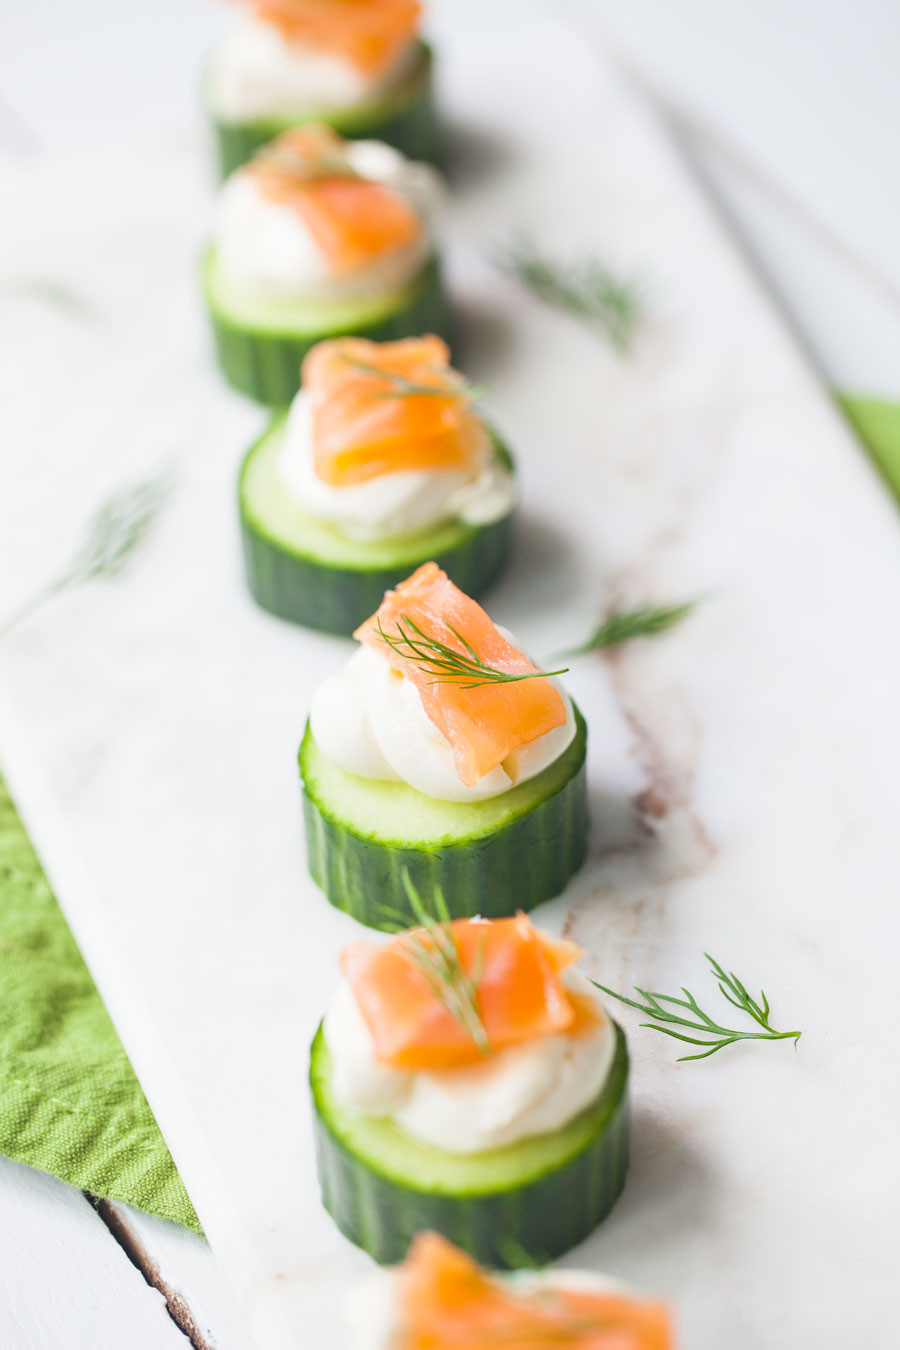 Cucumber Appetizers With Dill And Cream Cheese
 Cucumber and Smoked Salmon Hors D oeuvres